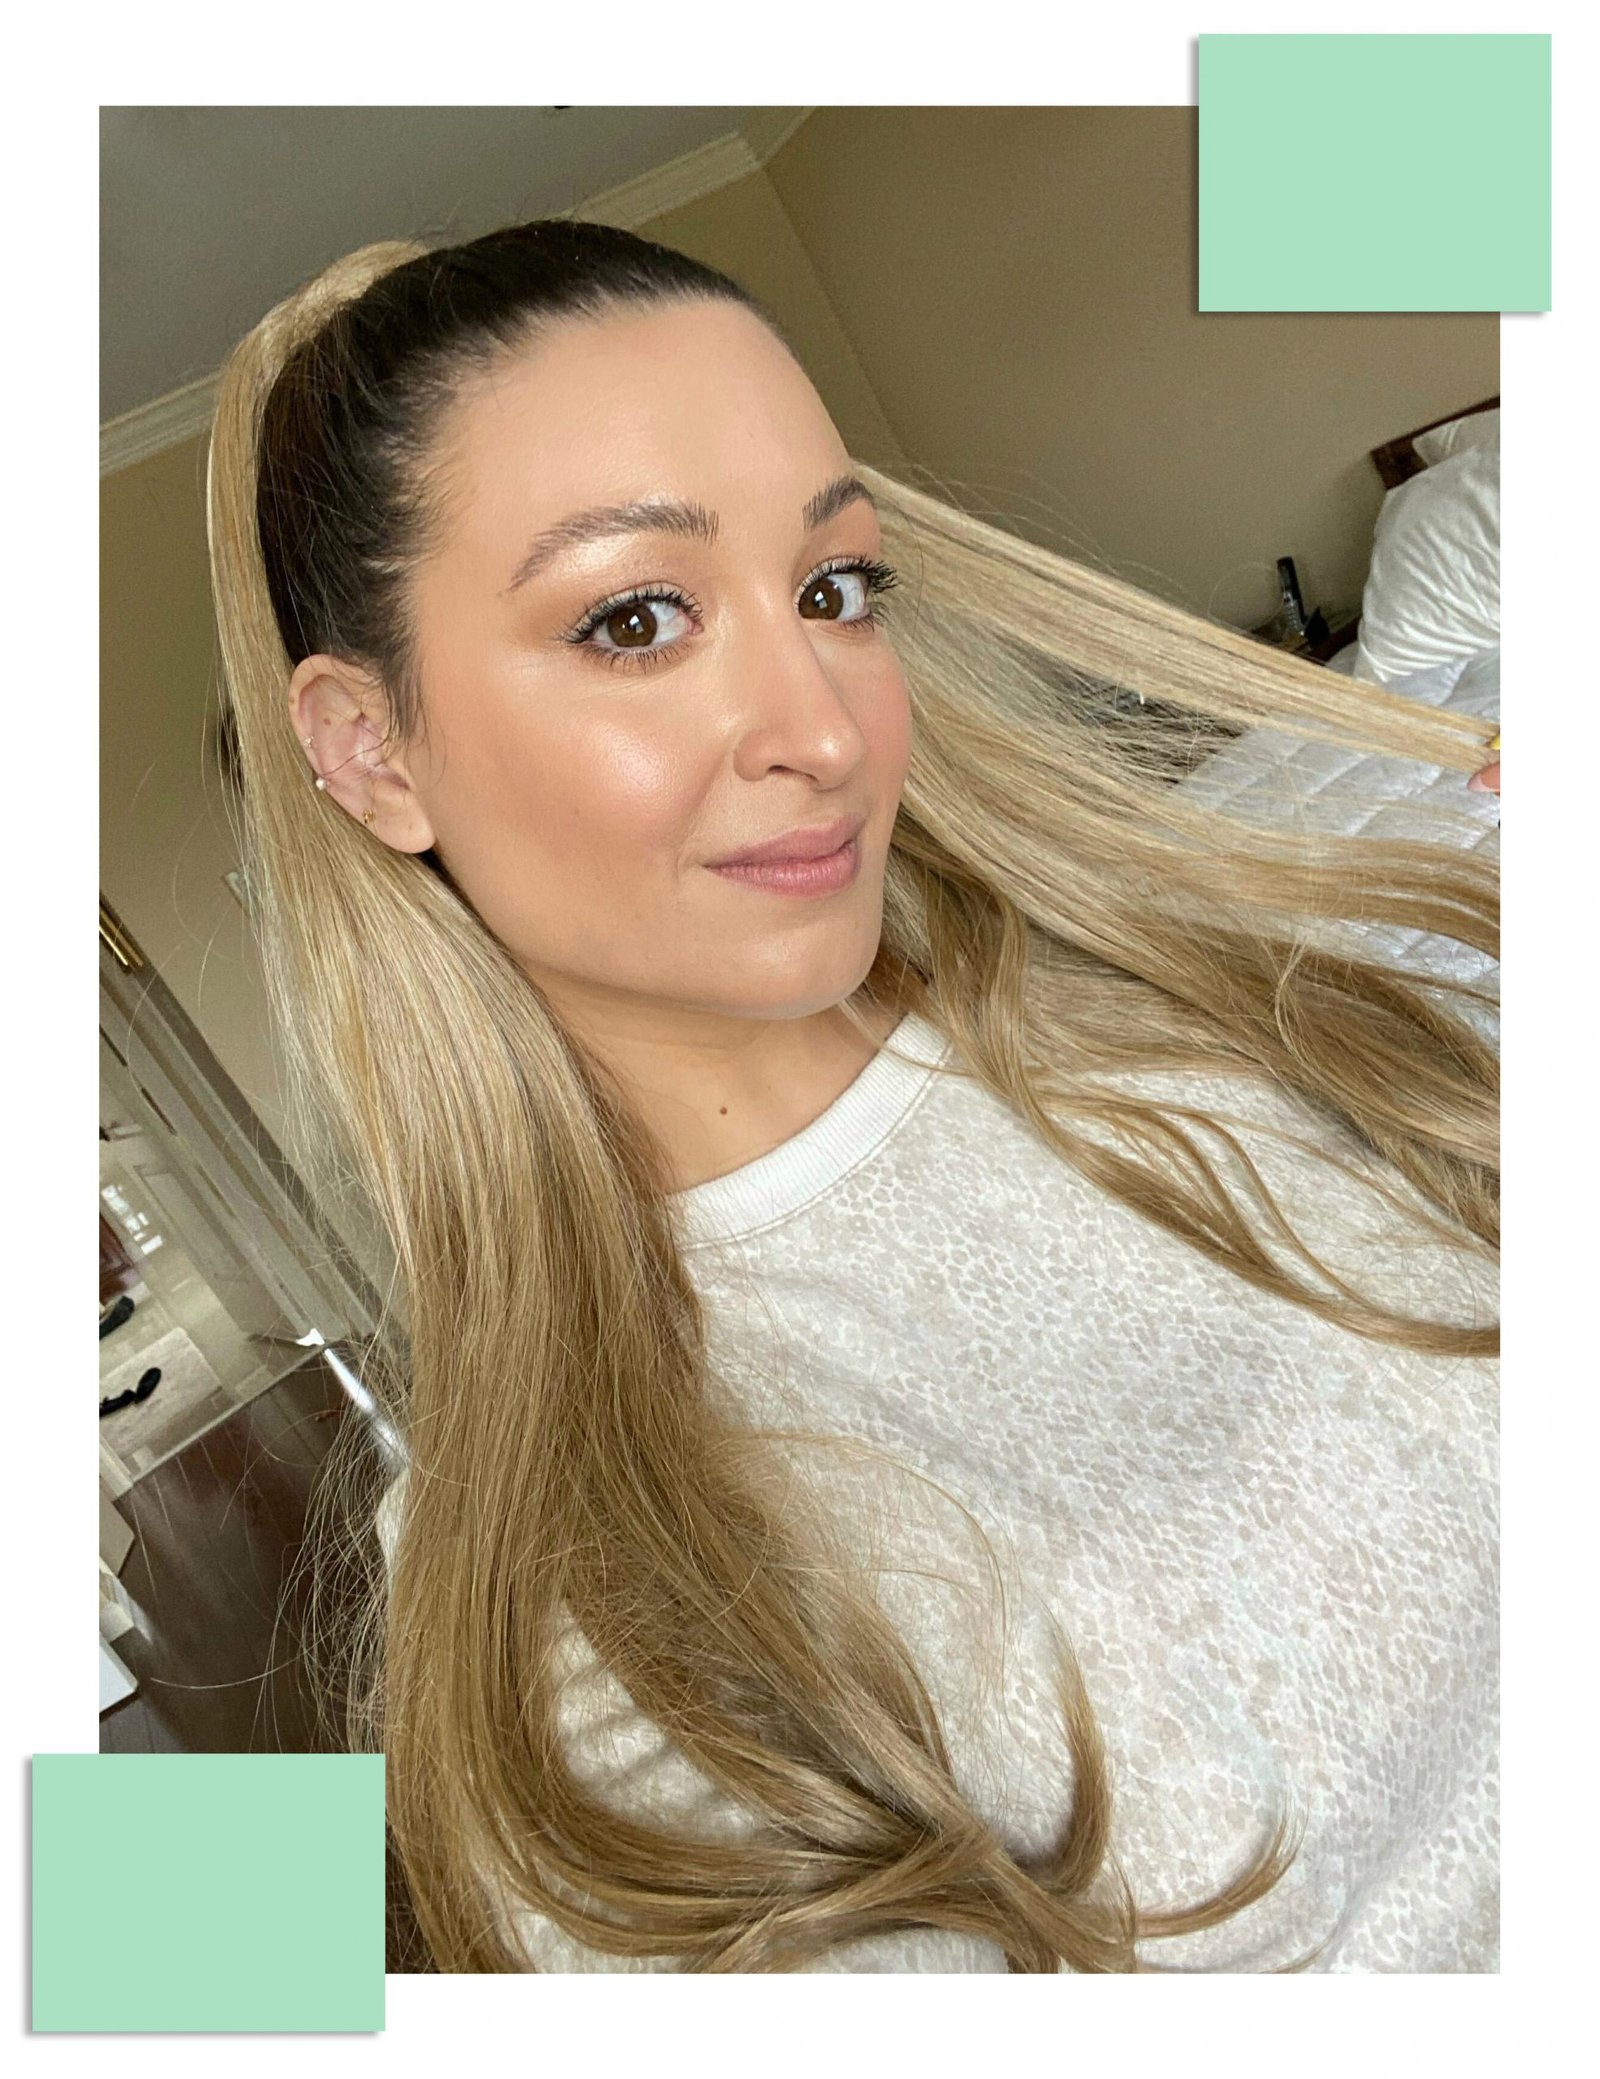 These Ponytail Extensions Are My Quick Secret To Looking Glam on Zoom